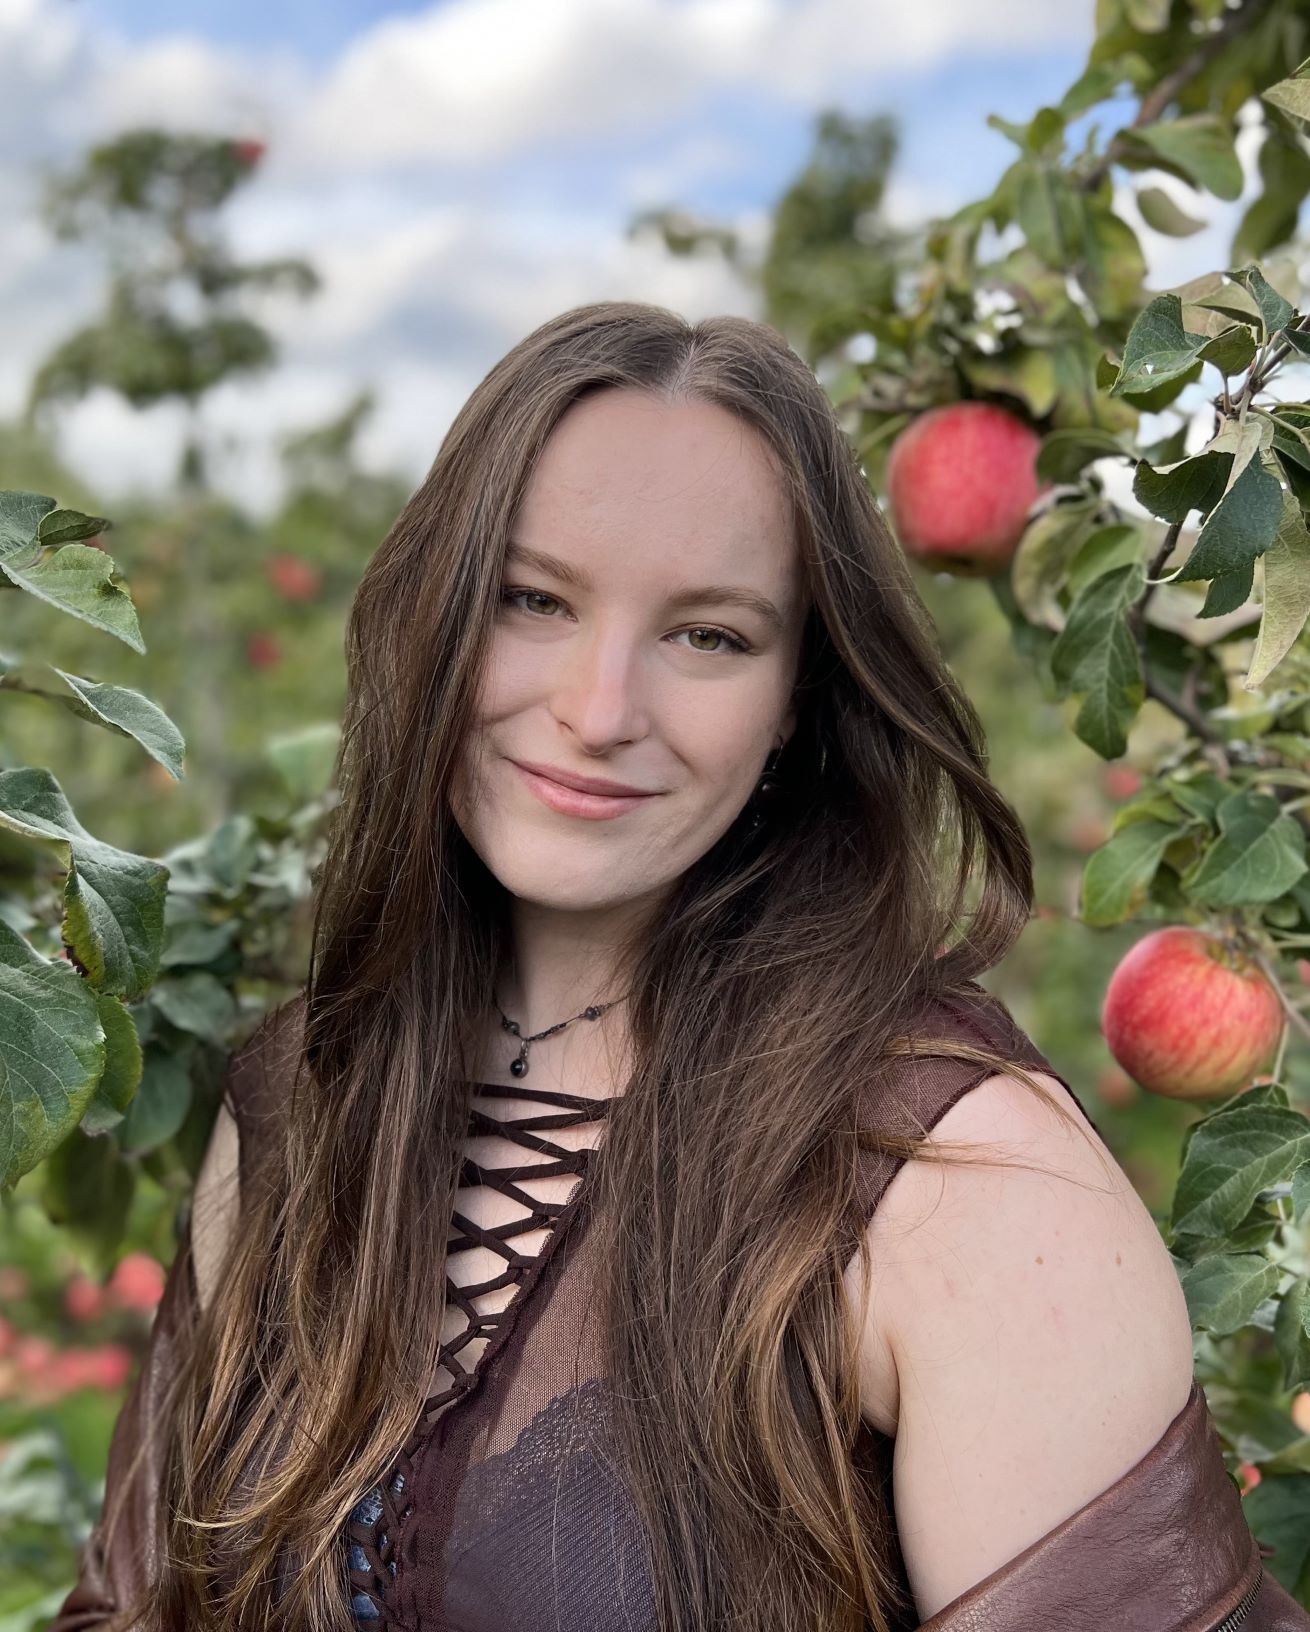 Elizabeth smiling with dark hair down and wearing a brown shirt, standing in front of an apple tree